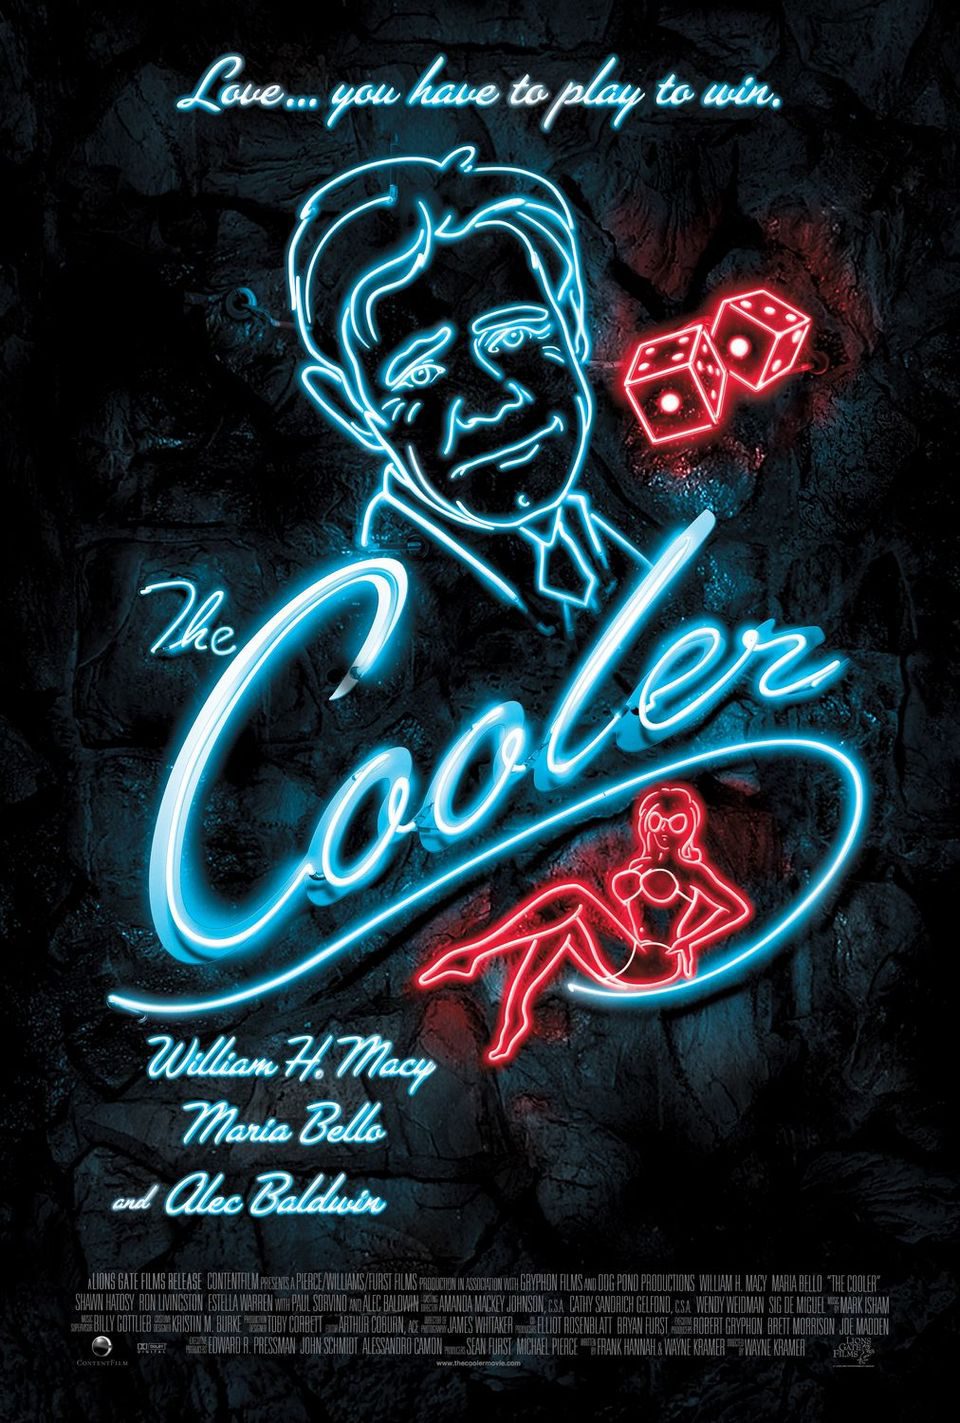 Poster of The Cooler - EEUU